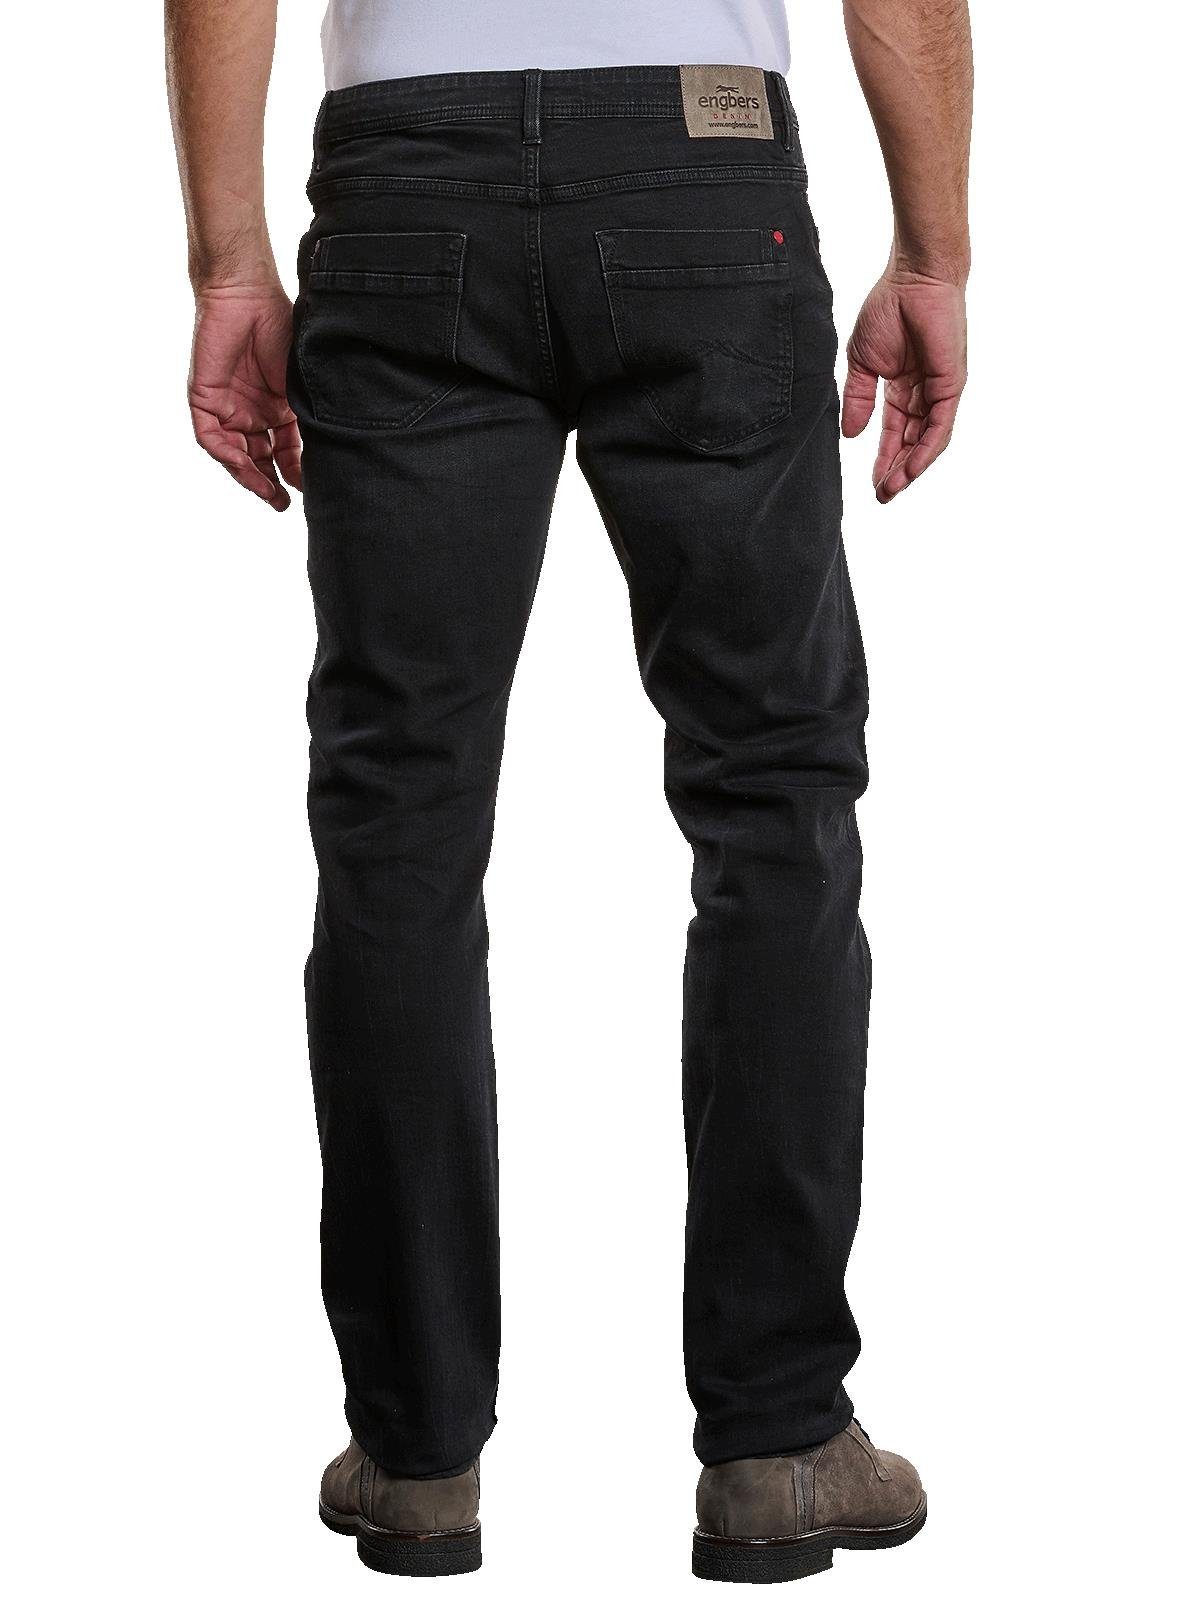 Superstretch Engbers 5-Pocket Jeans Stretch-Jeans